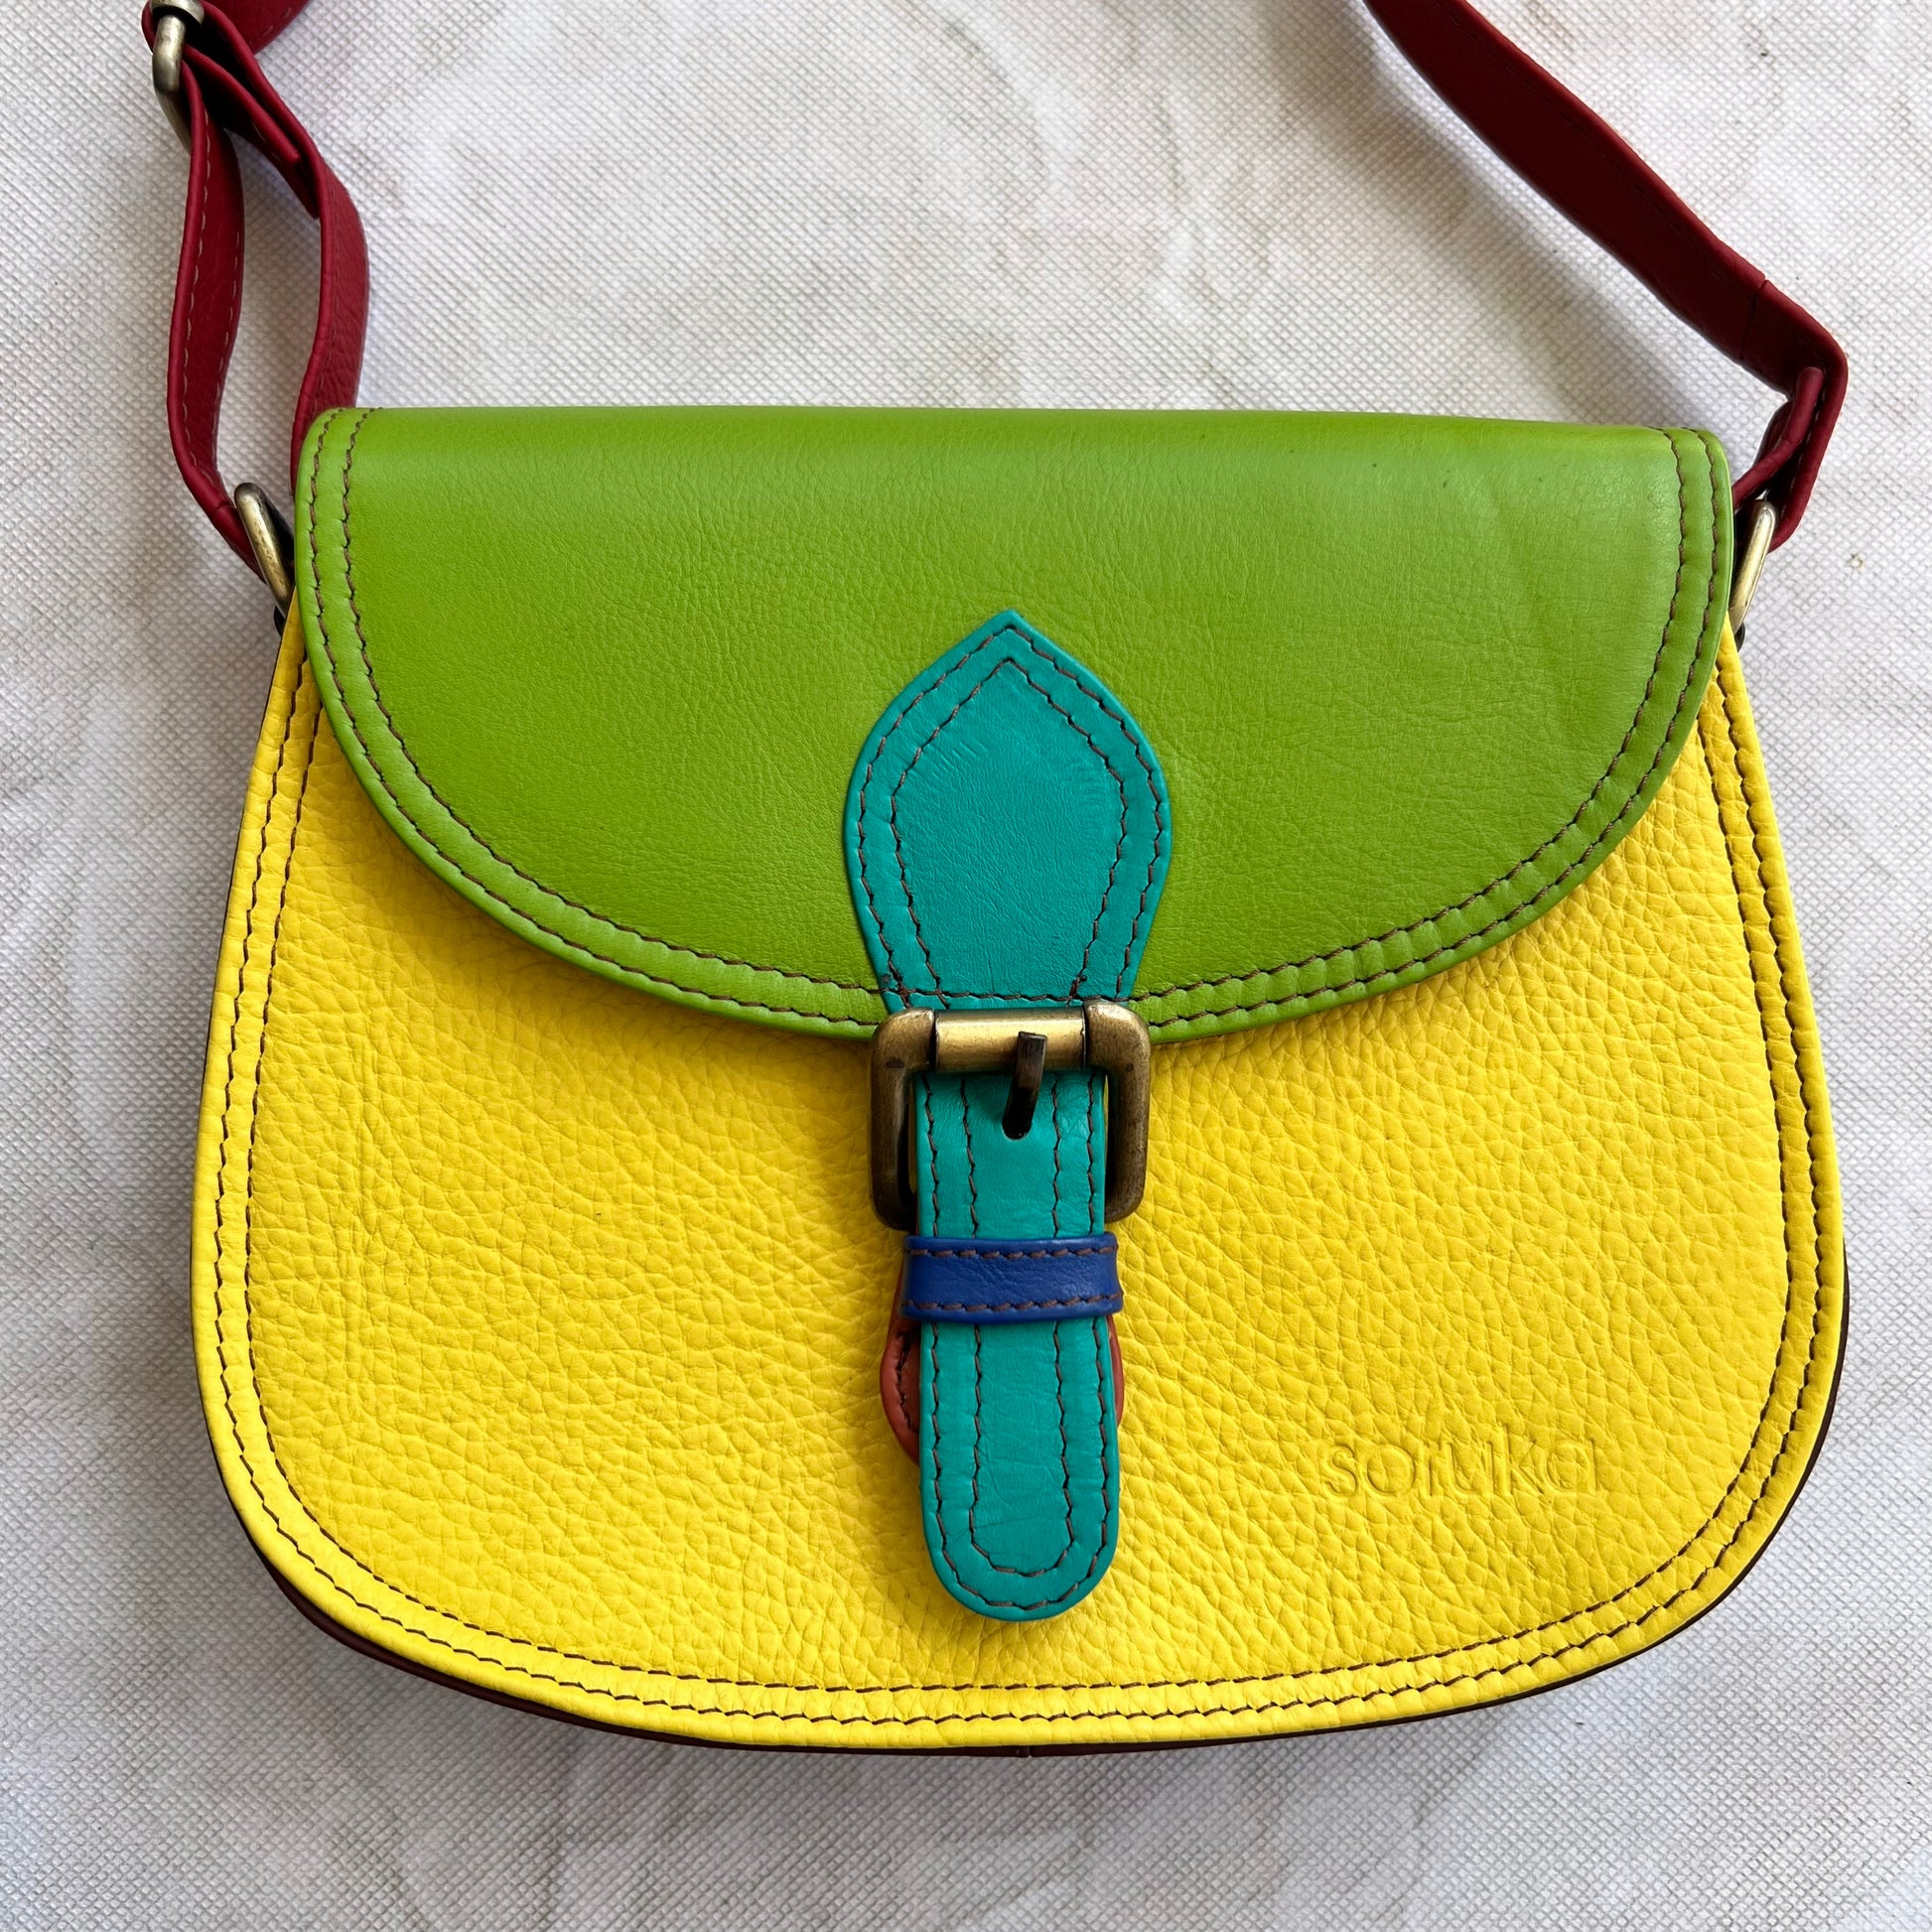 Rounded yellow bag with green flap and blue buckle.